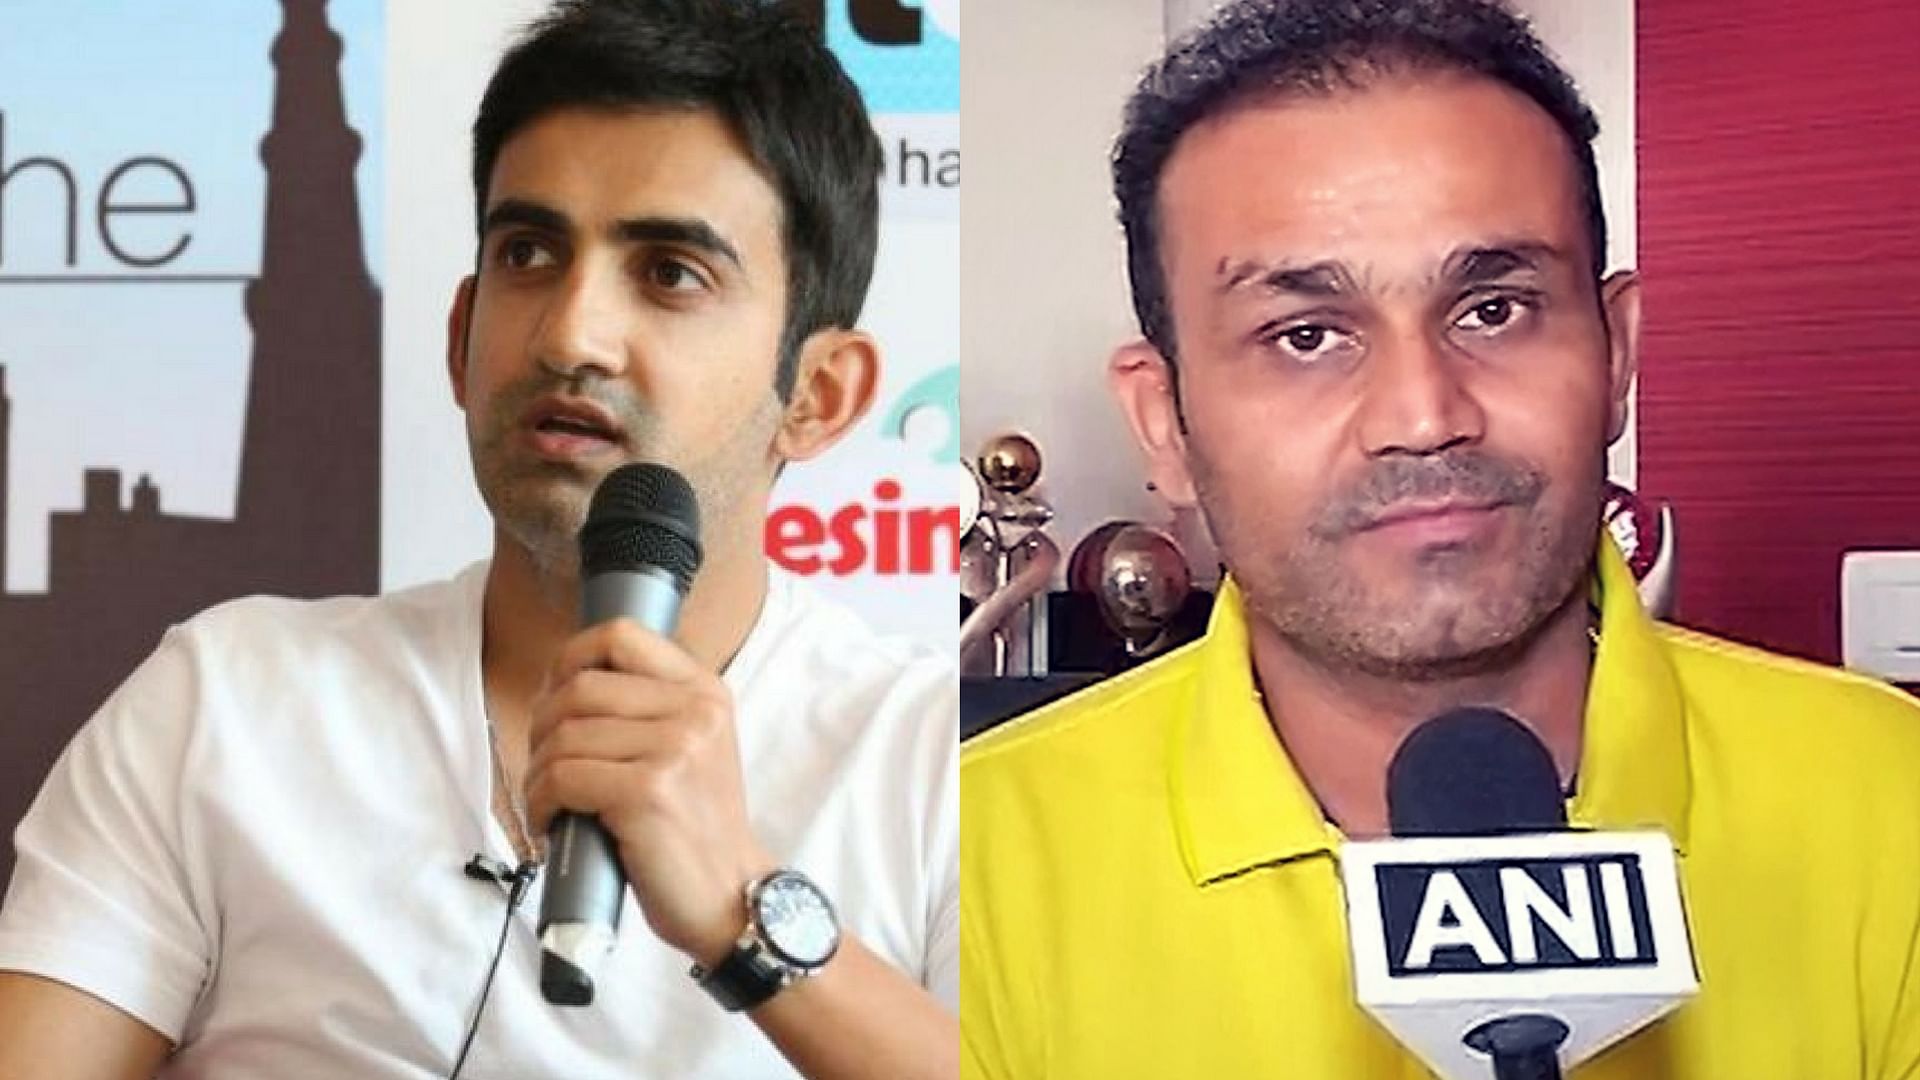 Gautam Gambhir, Virender Sehwag have come out in support of the CRPF jawans.(Photo: <b>The Quint</b>)